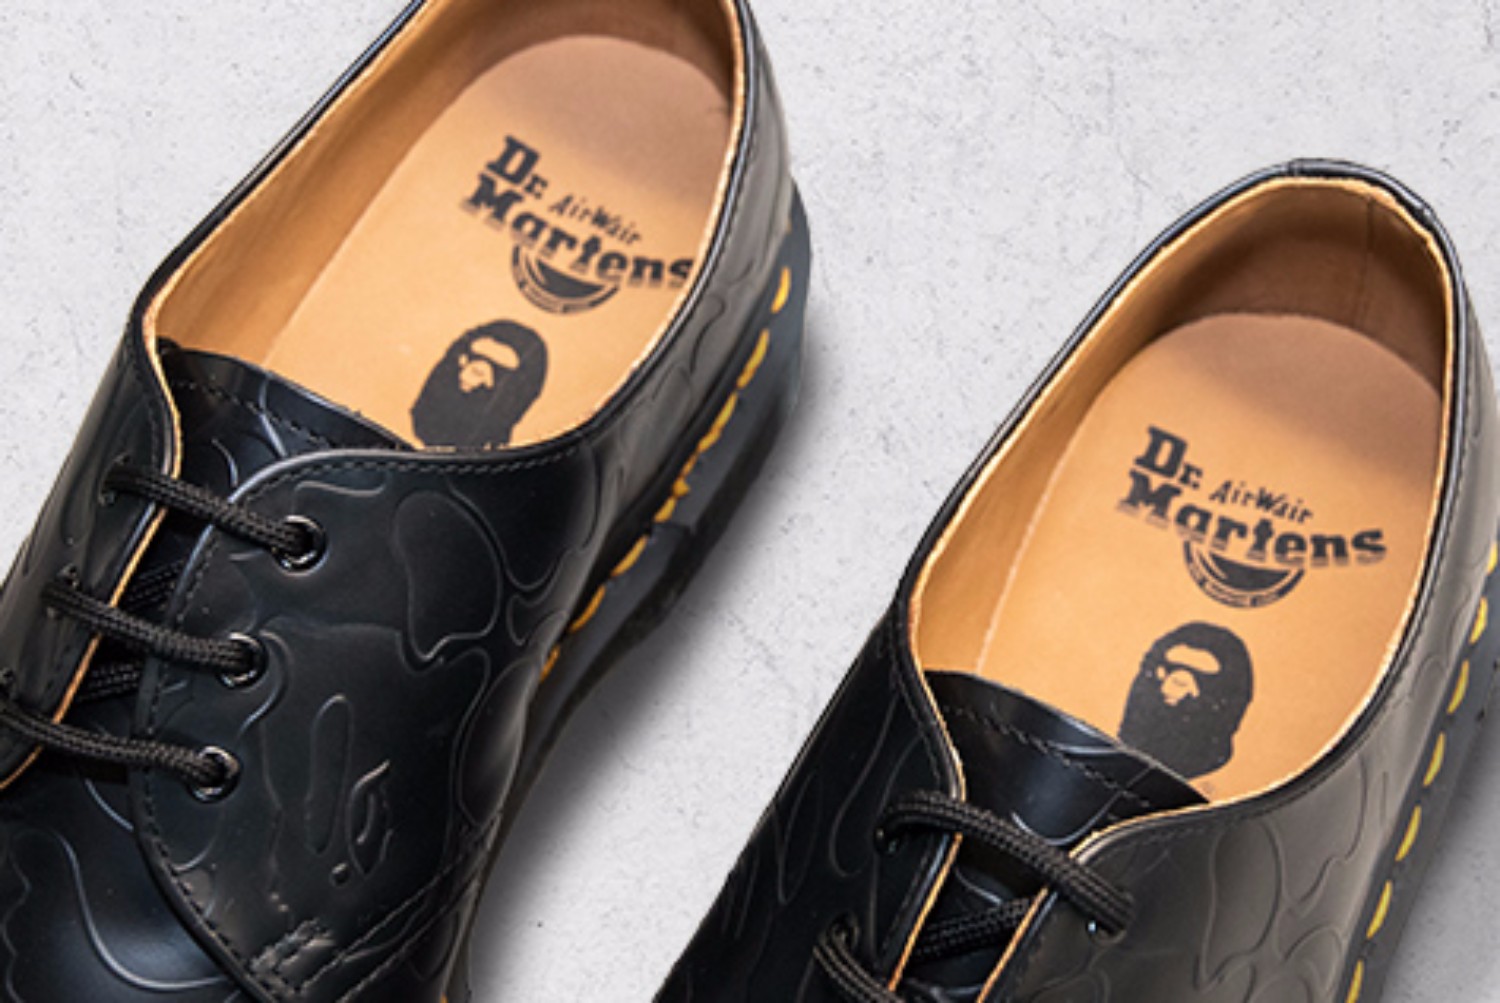 Get Your Hands On This BAPE x Dr. Martens Collaboration Right Now